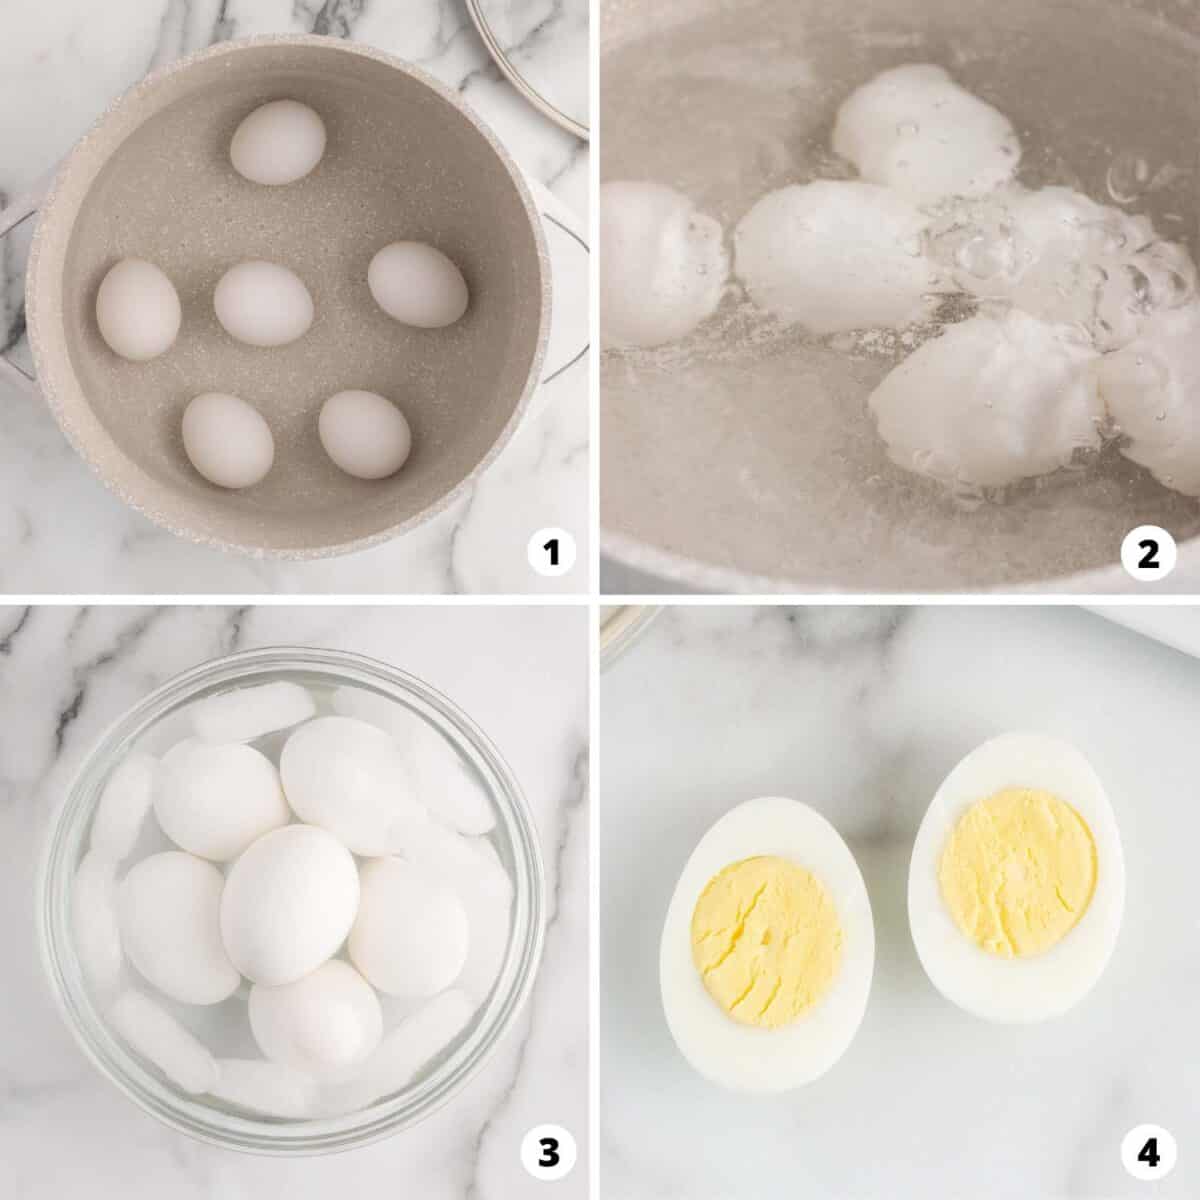 Showing how to make hard boiled eggs in a 4 step collage. 